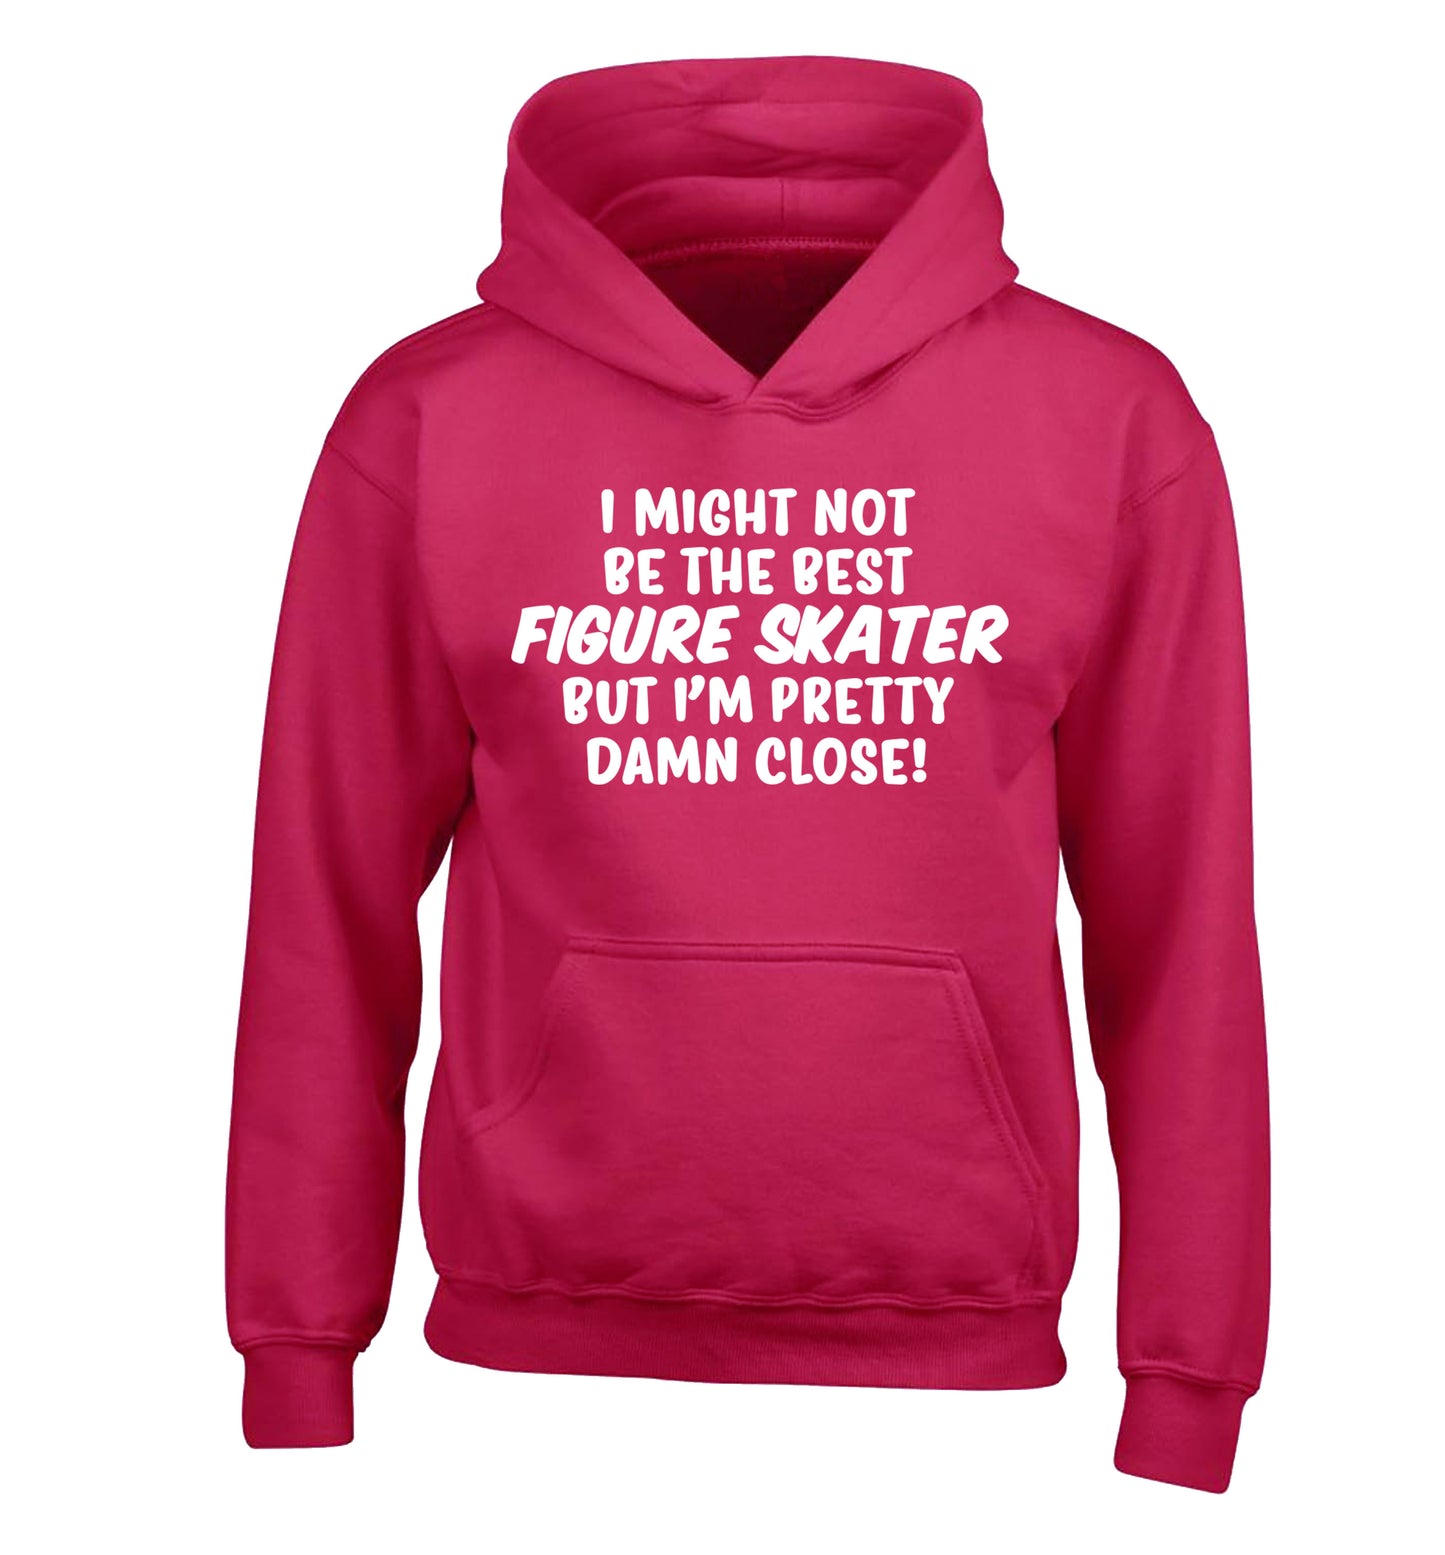 I might not be the best figure skater but I'm pretty damn close! children's pink hoodie 12-14 Years